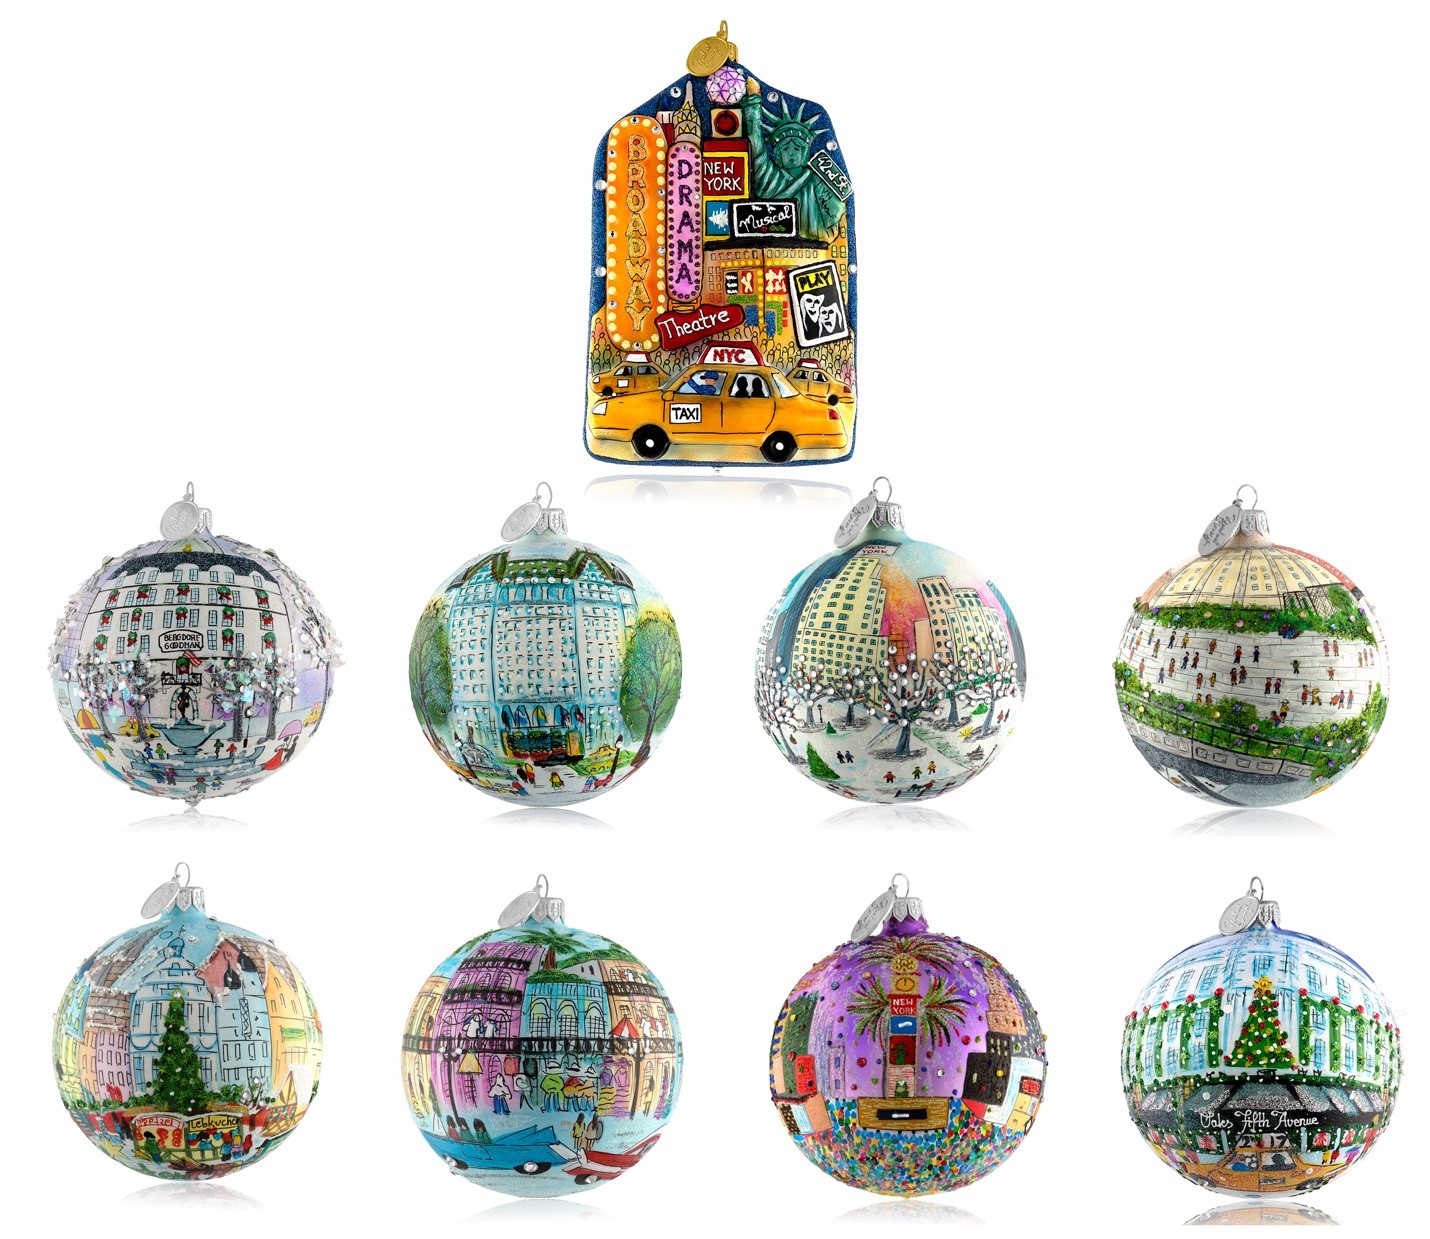 2017 Ornaments from Michael Storrings